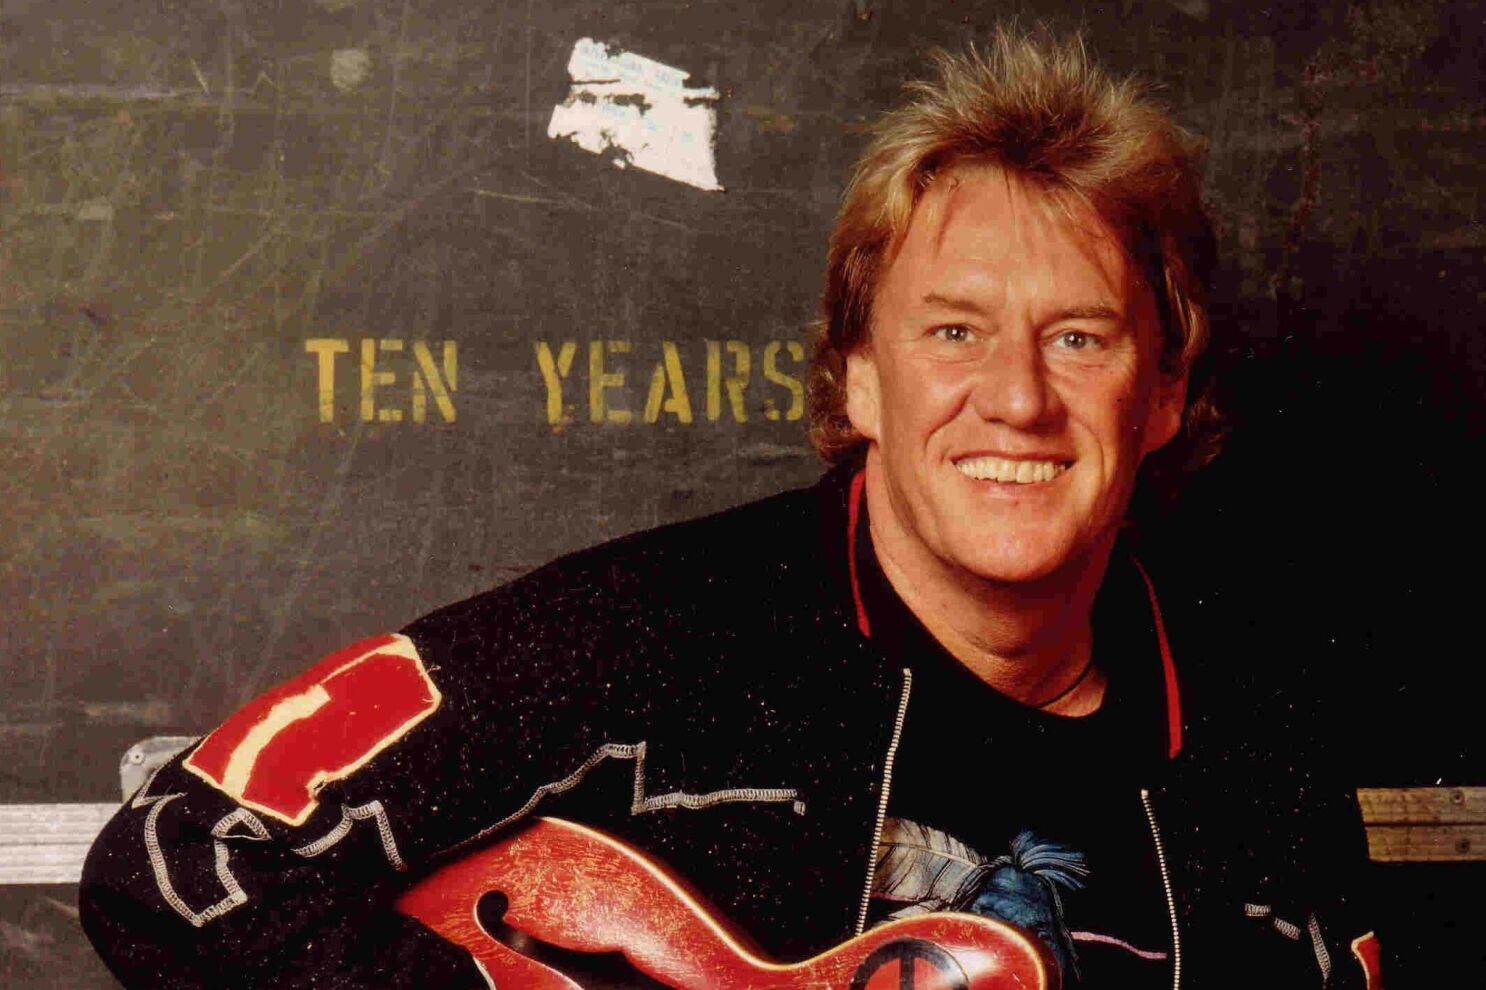 Ten Years After's Alvin Lee has died - The San Diego Union-Tribune